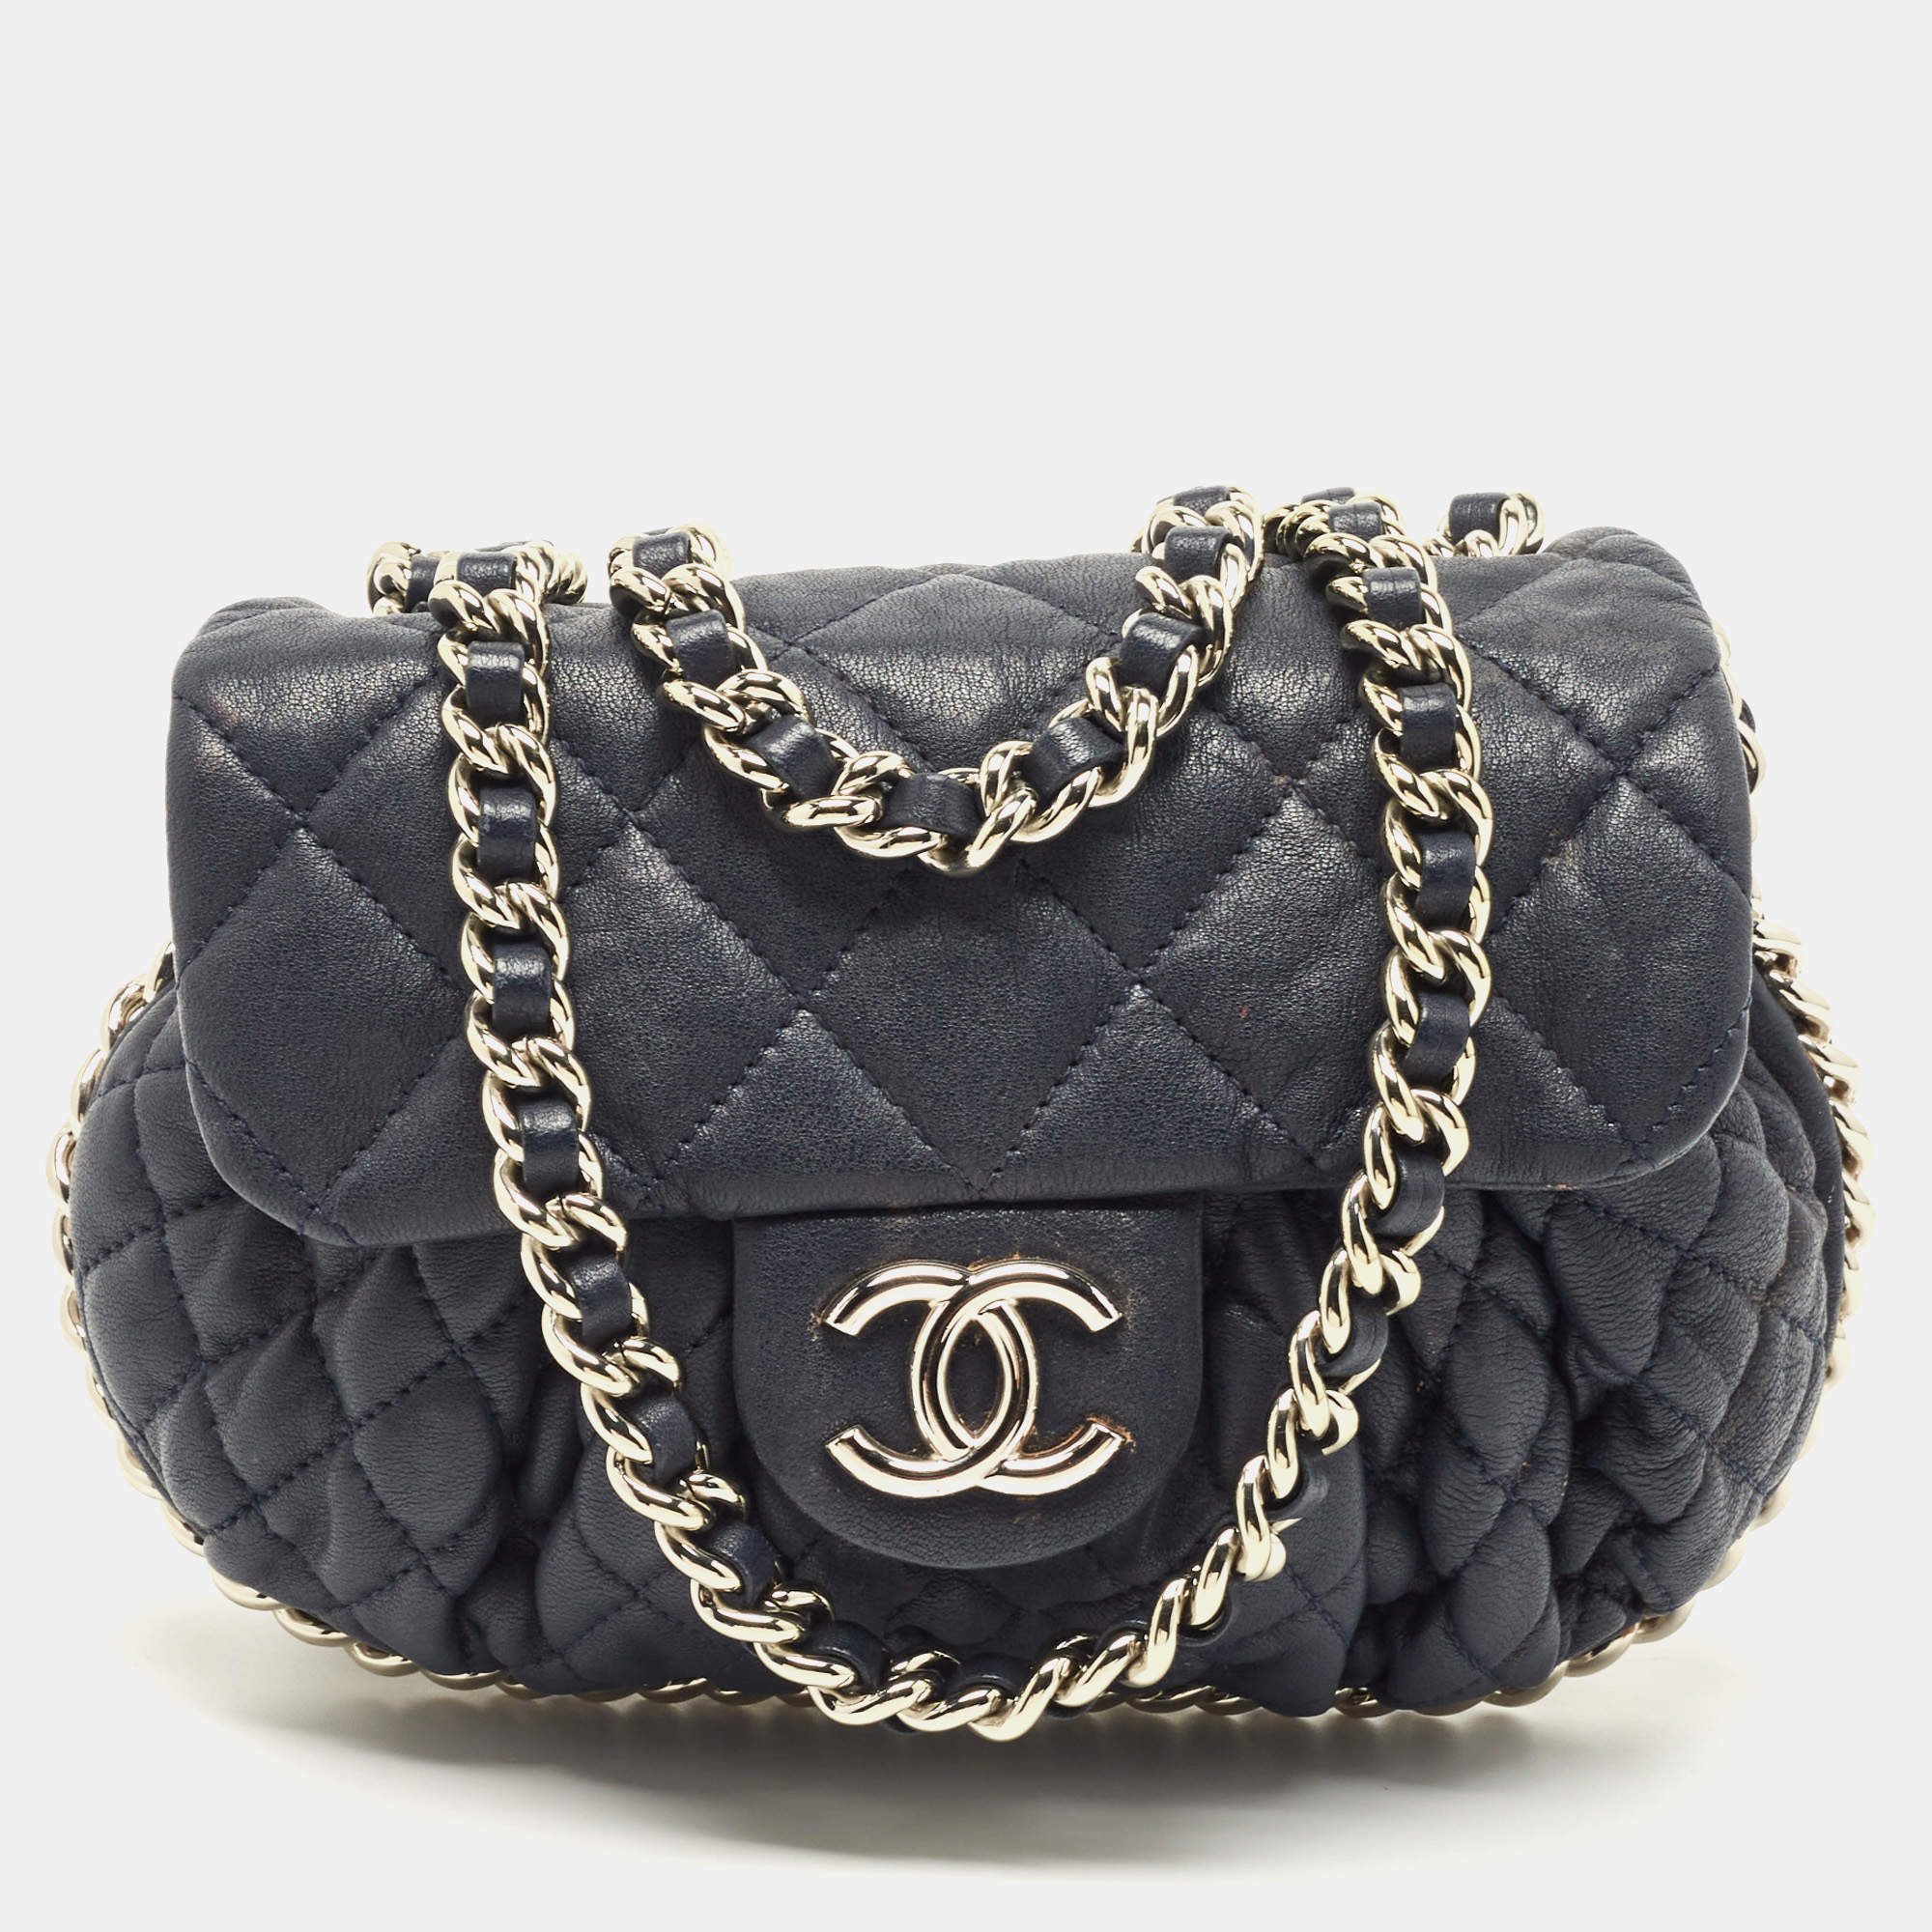 Chanel Navy Blue Quilted Leather CC Chain Around Flap Bag Chanel